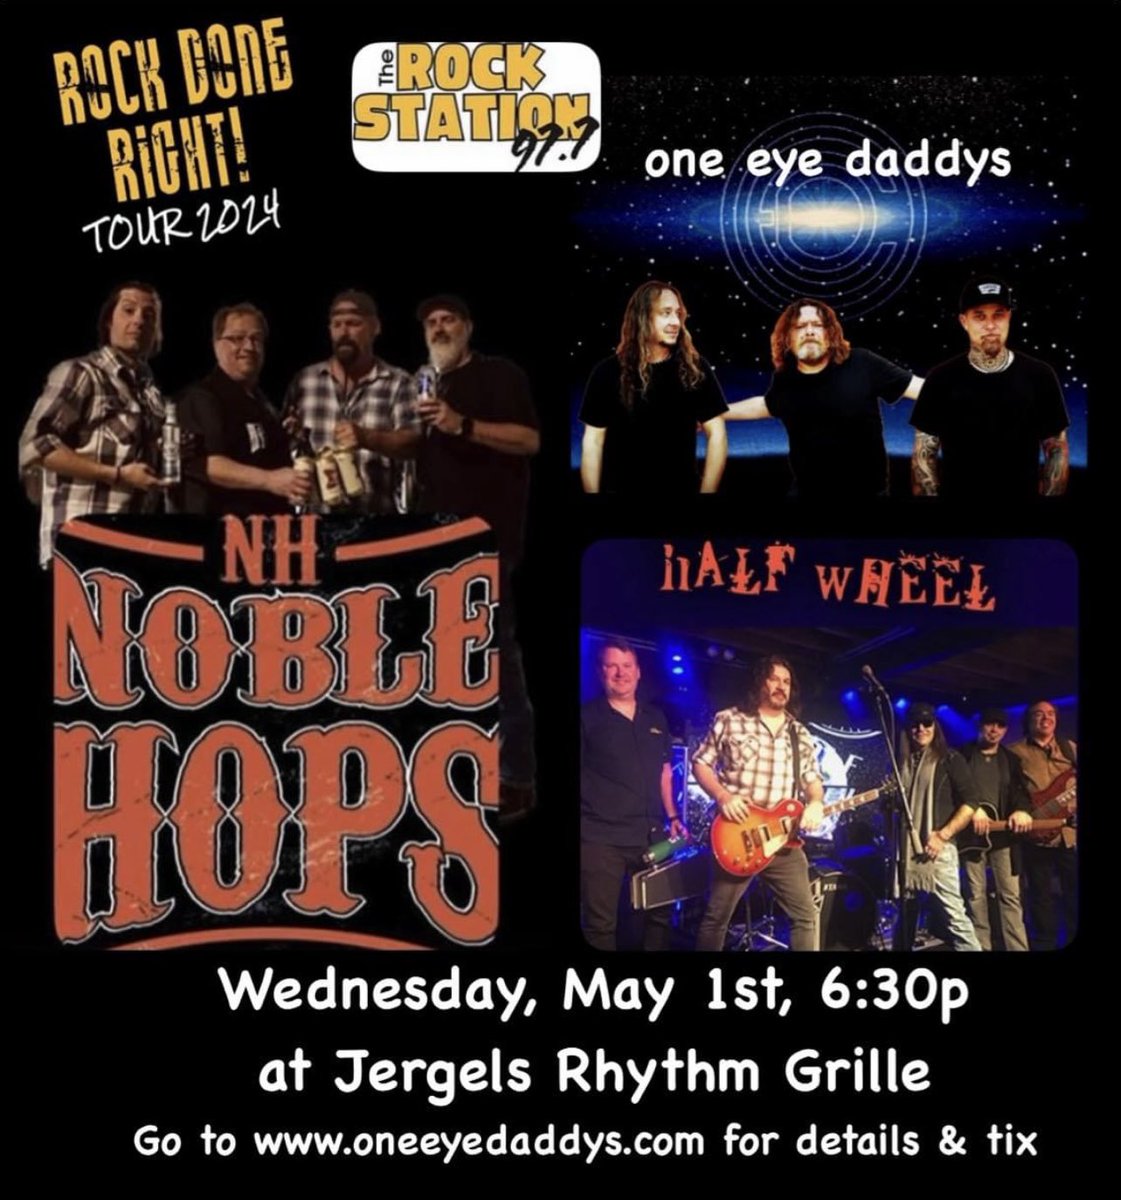 @oneeyedaddys open the show (6:30p) with #noblehopsmusic and #halfwheelband at @jergels Get tix at oneeyedaddys.com #supportlocalmusic #originalmusic #pittsburghmusicscene #livemusic